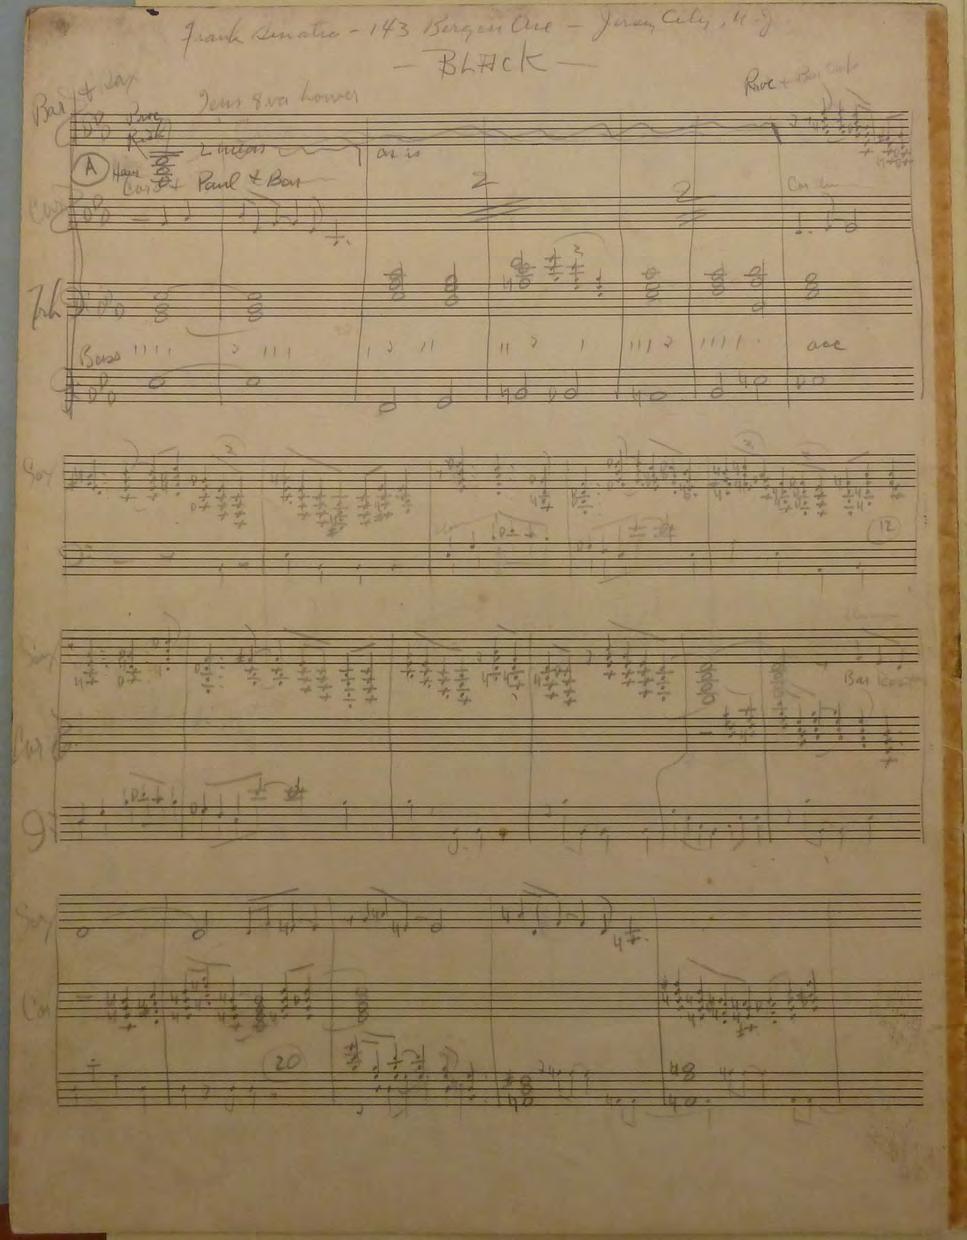 This is Duke Ellington s score or Work Song, the irst part o movement one, Black The presence o Frank Sinatra s name and address at the top most likely dates this to the irst hal o 1942.